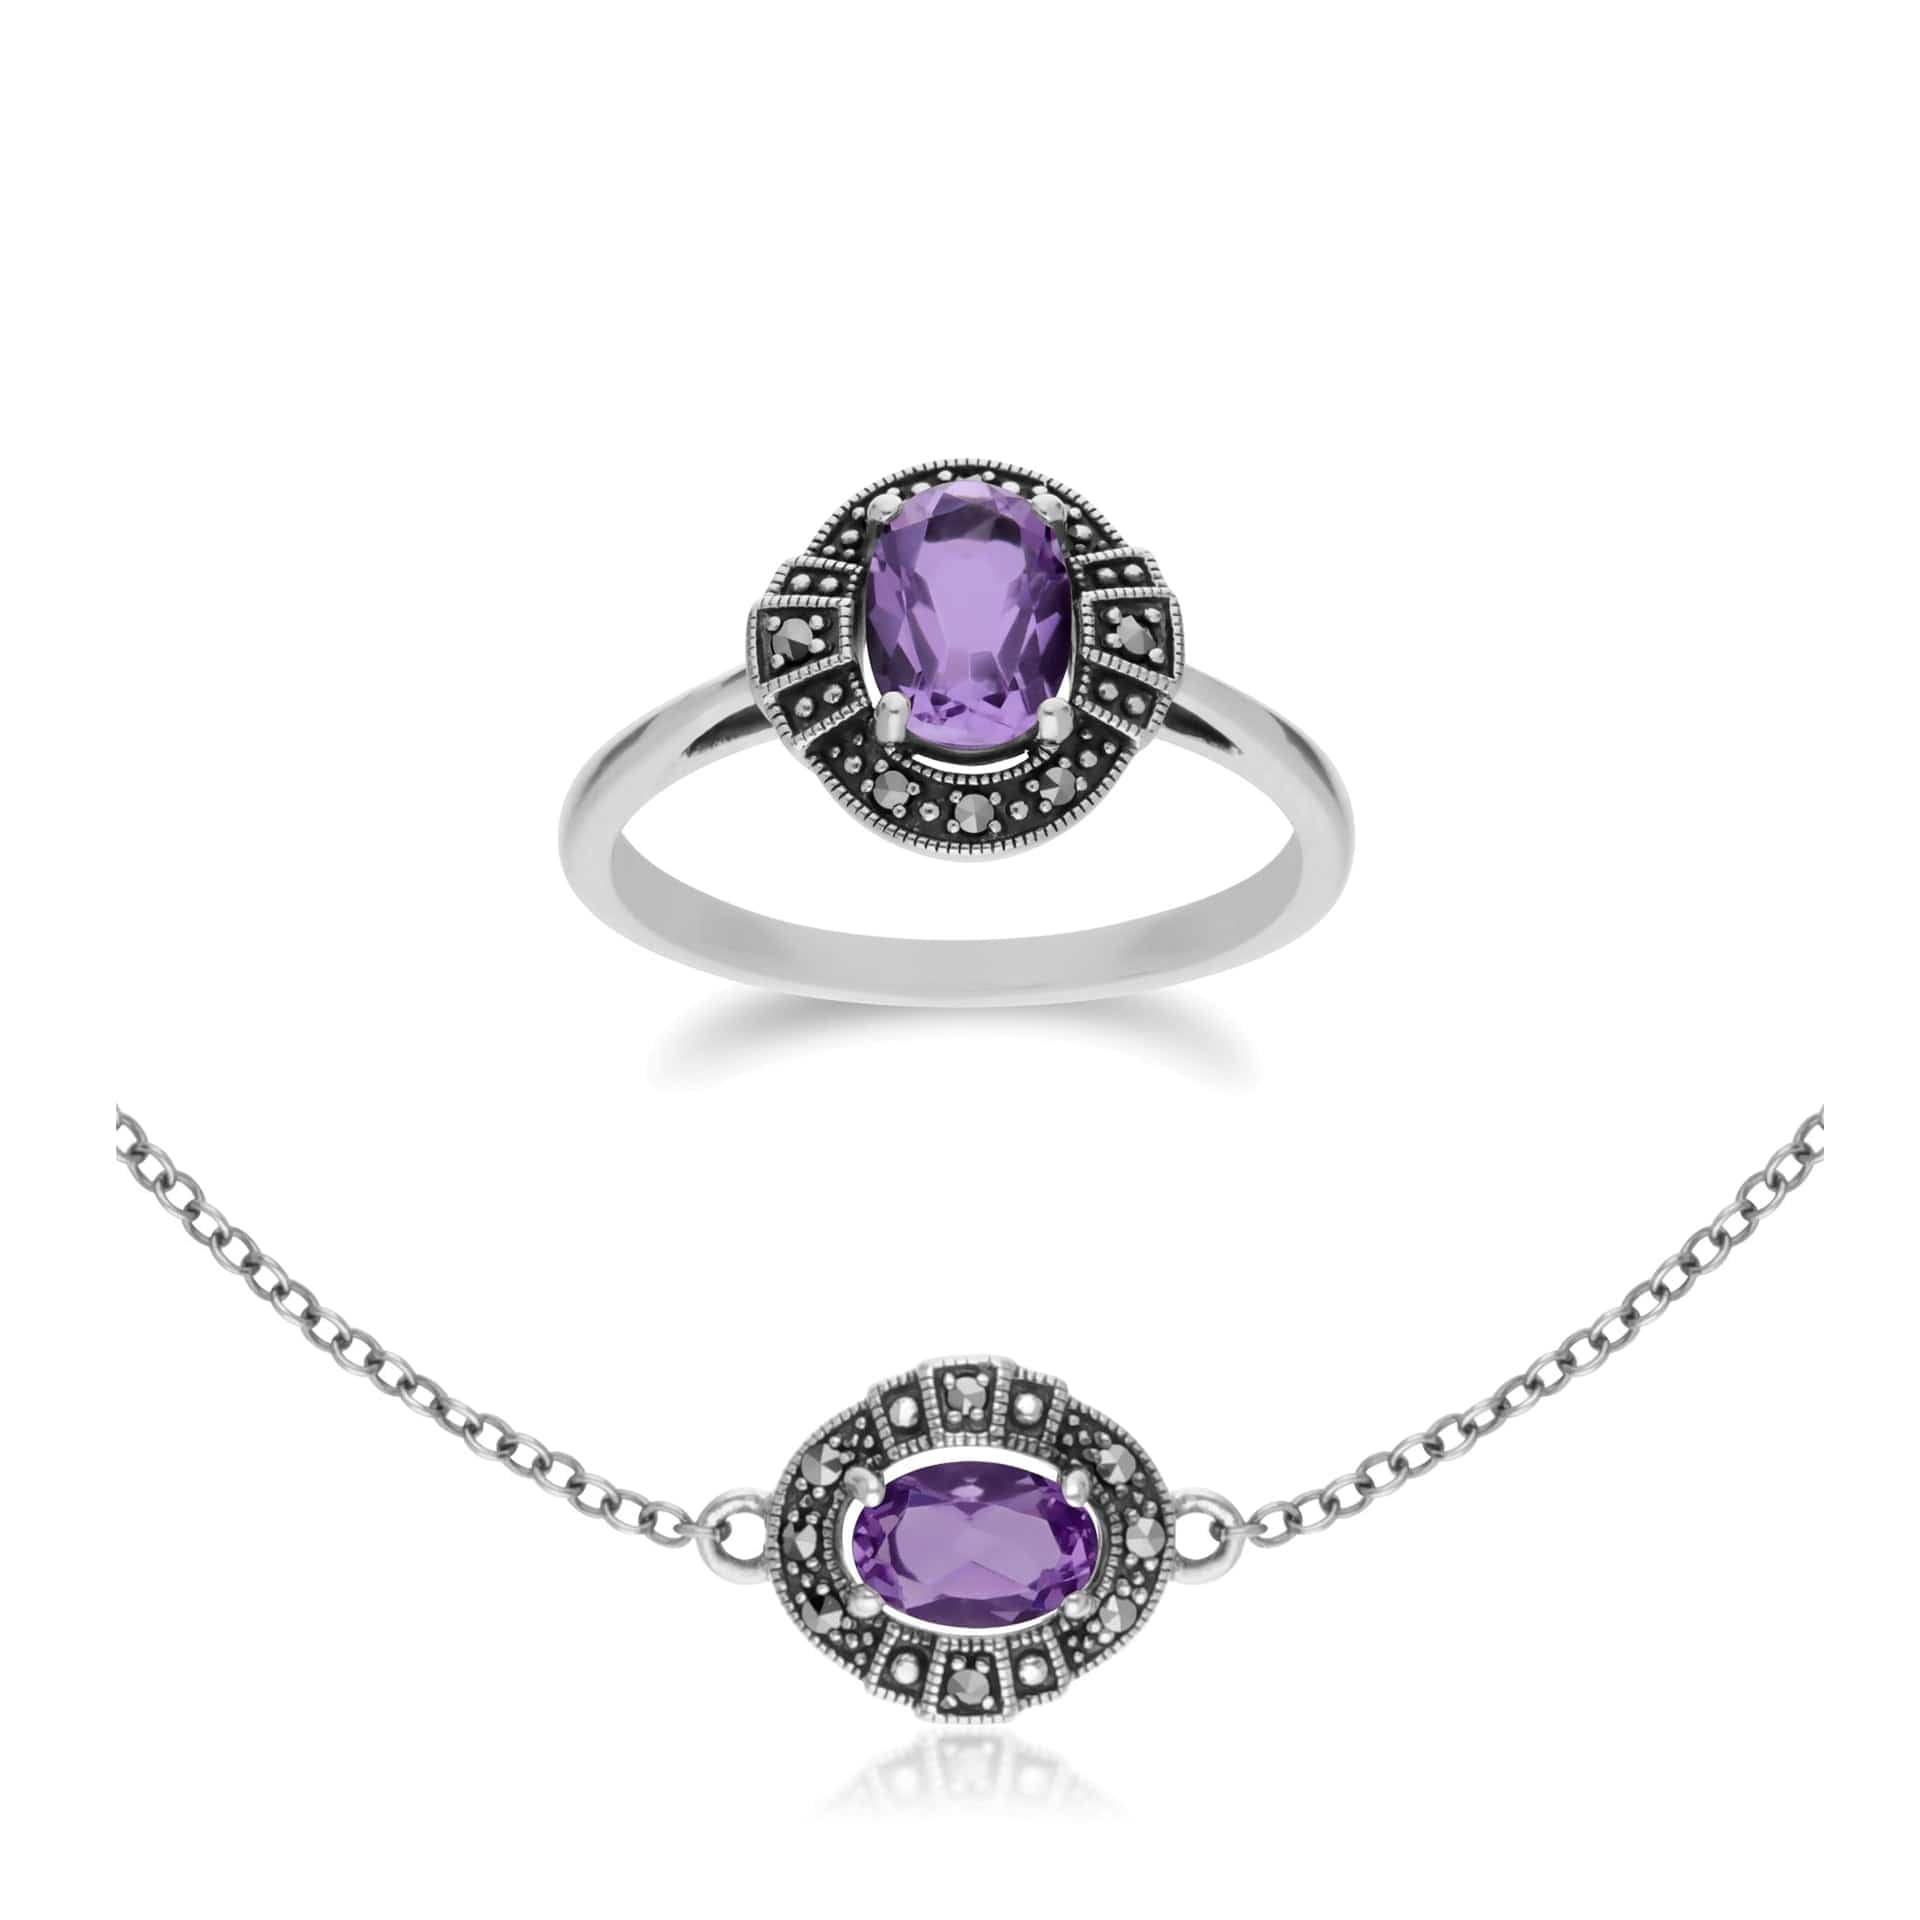 214L165402925-214R605702925 Art Deco Style Oval Amethyst and Marcasite Cluster Silver Ring & Bracelet Set 1